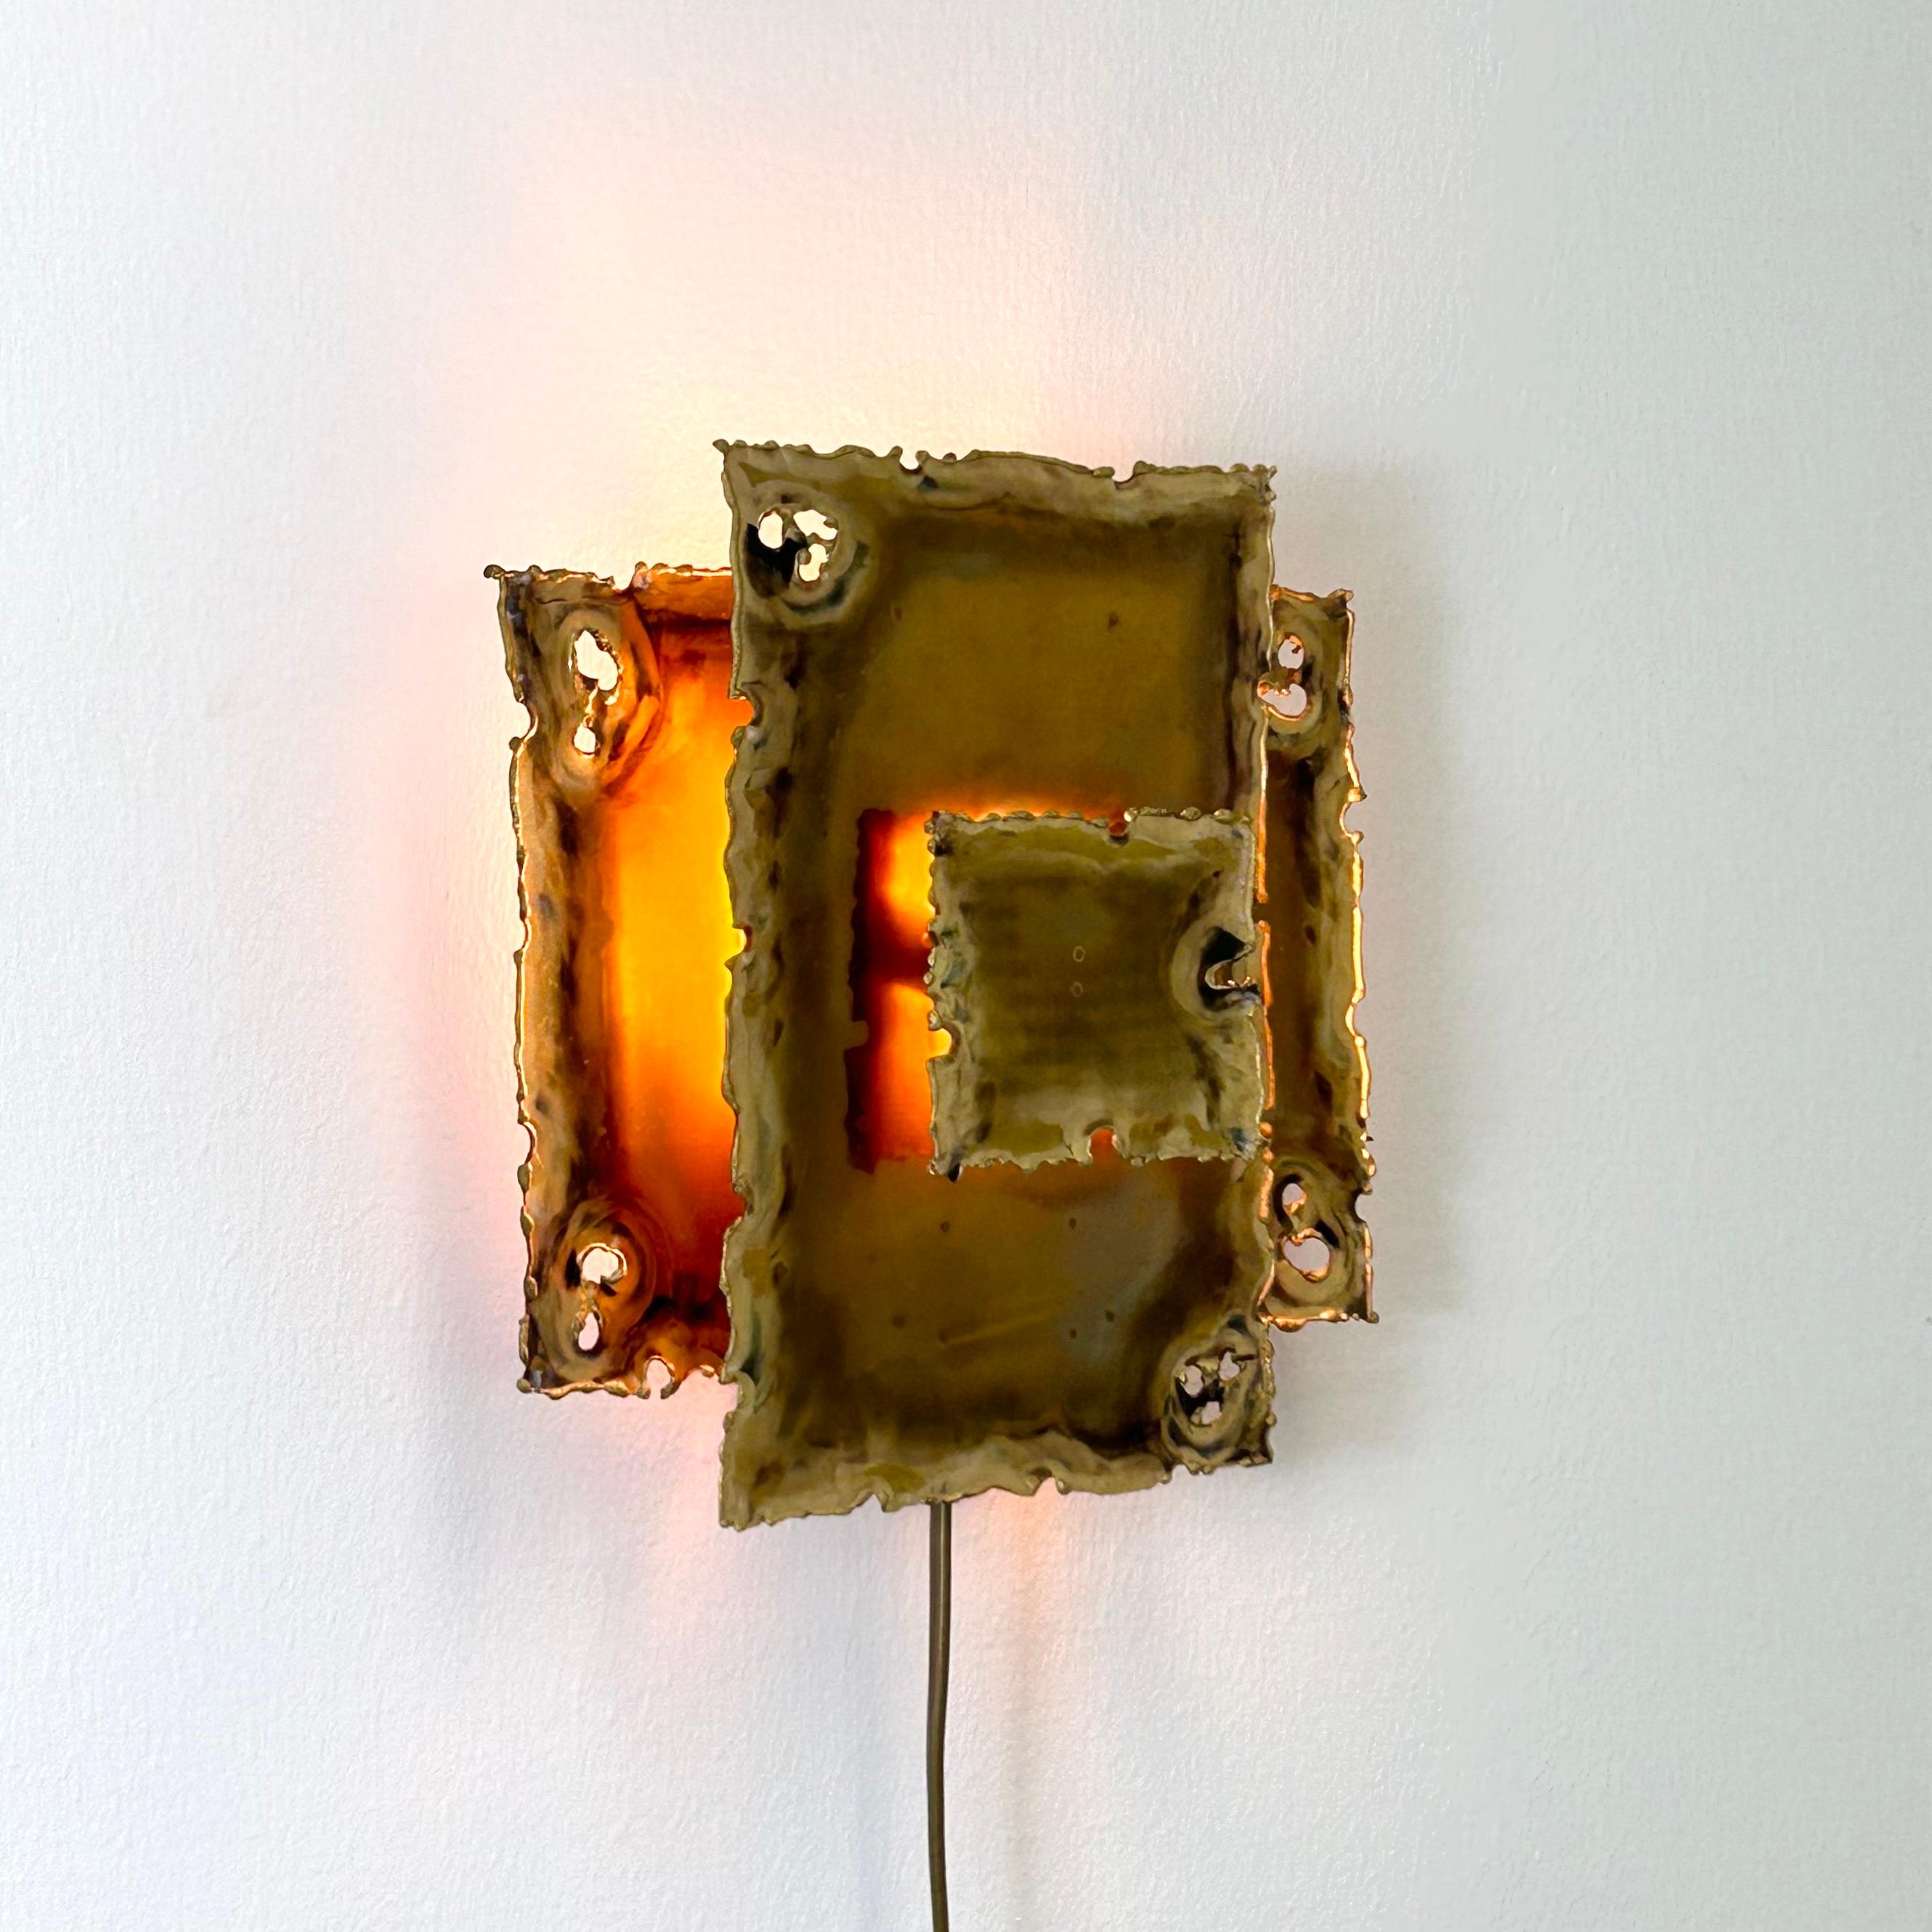 A classic wall lamp by the Svend Aage Holm Sørensen adding an elegant touch to any modern interior.

* A square, multilayered flame-cut brass wall lamp
* Designer: Svend Aage Holm Sørensen
* Producer: Holm Sørensen & Co
* Model: 5202
* Year: 1960s
*